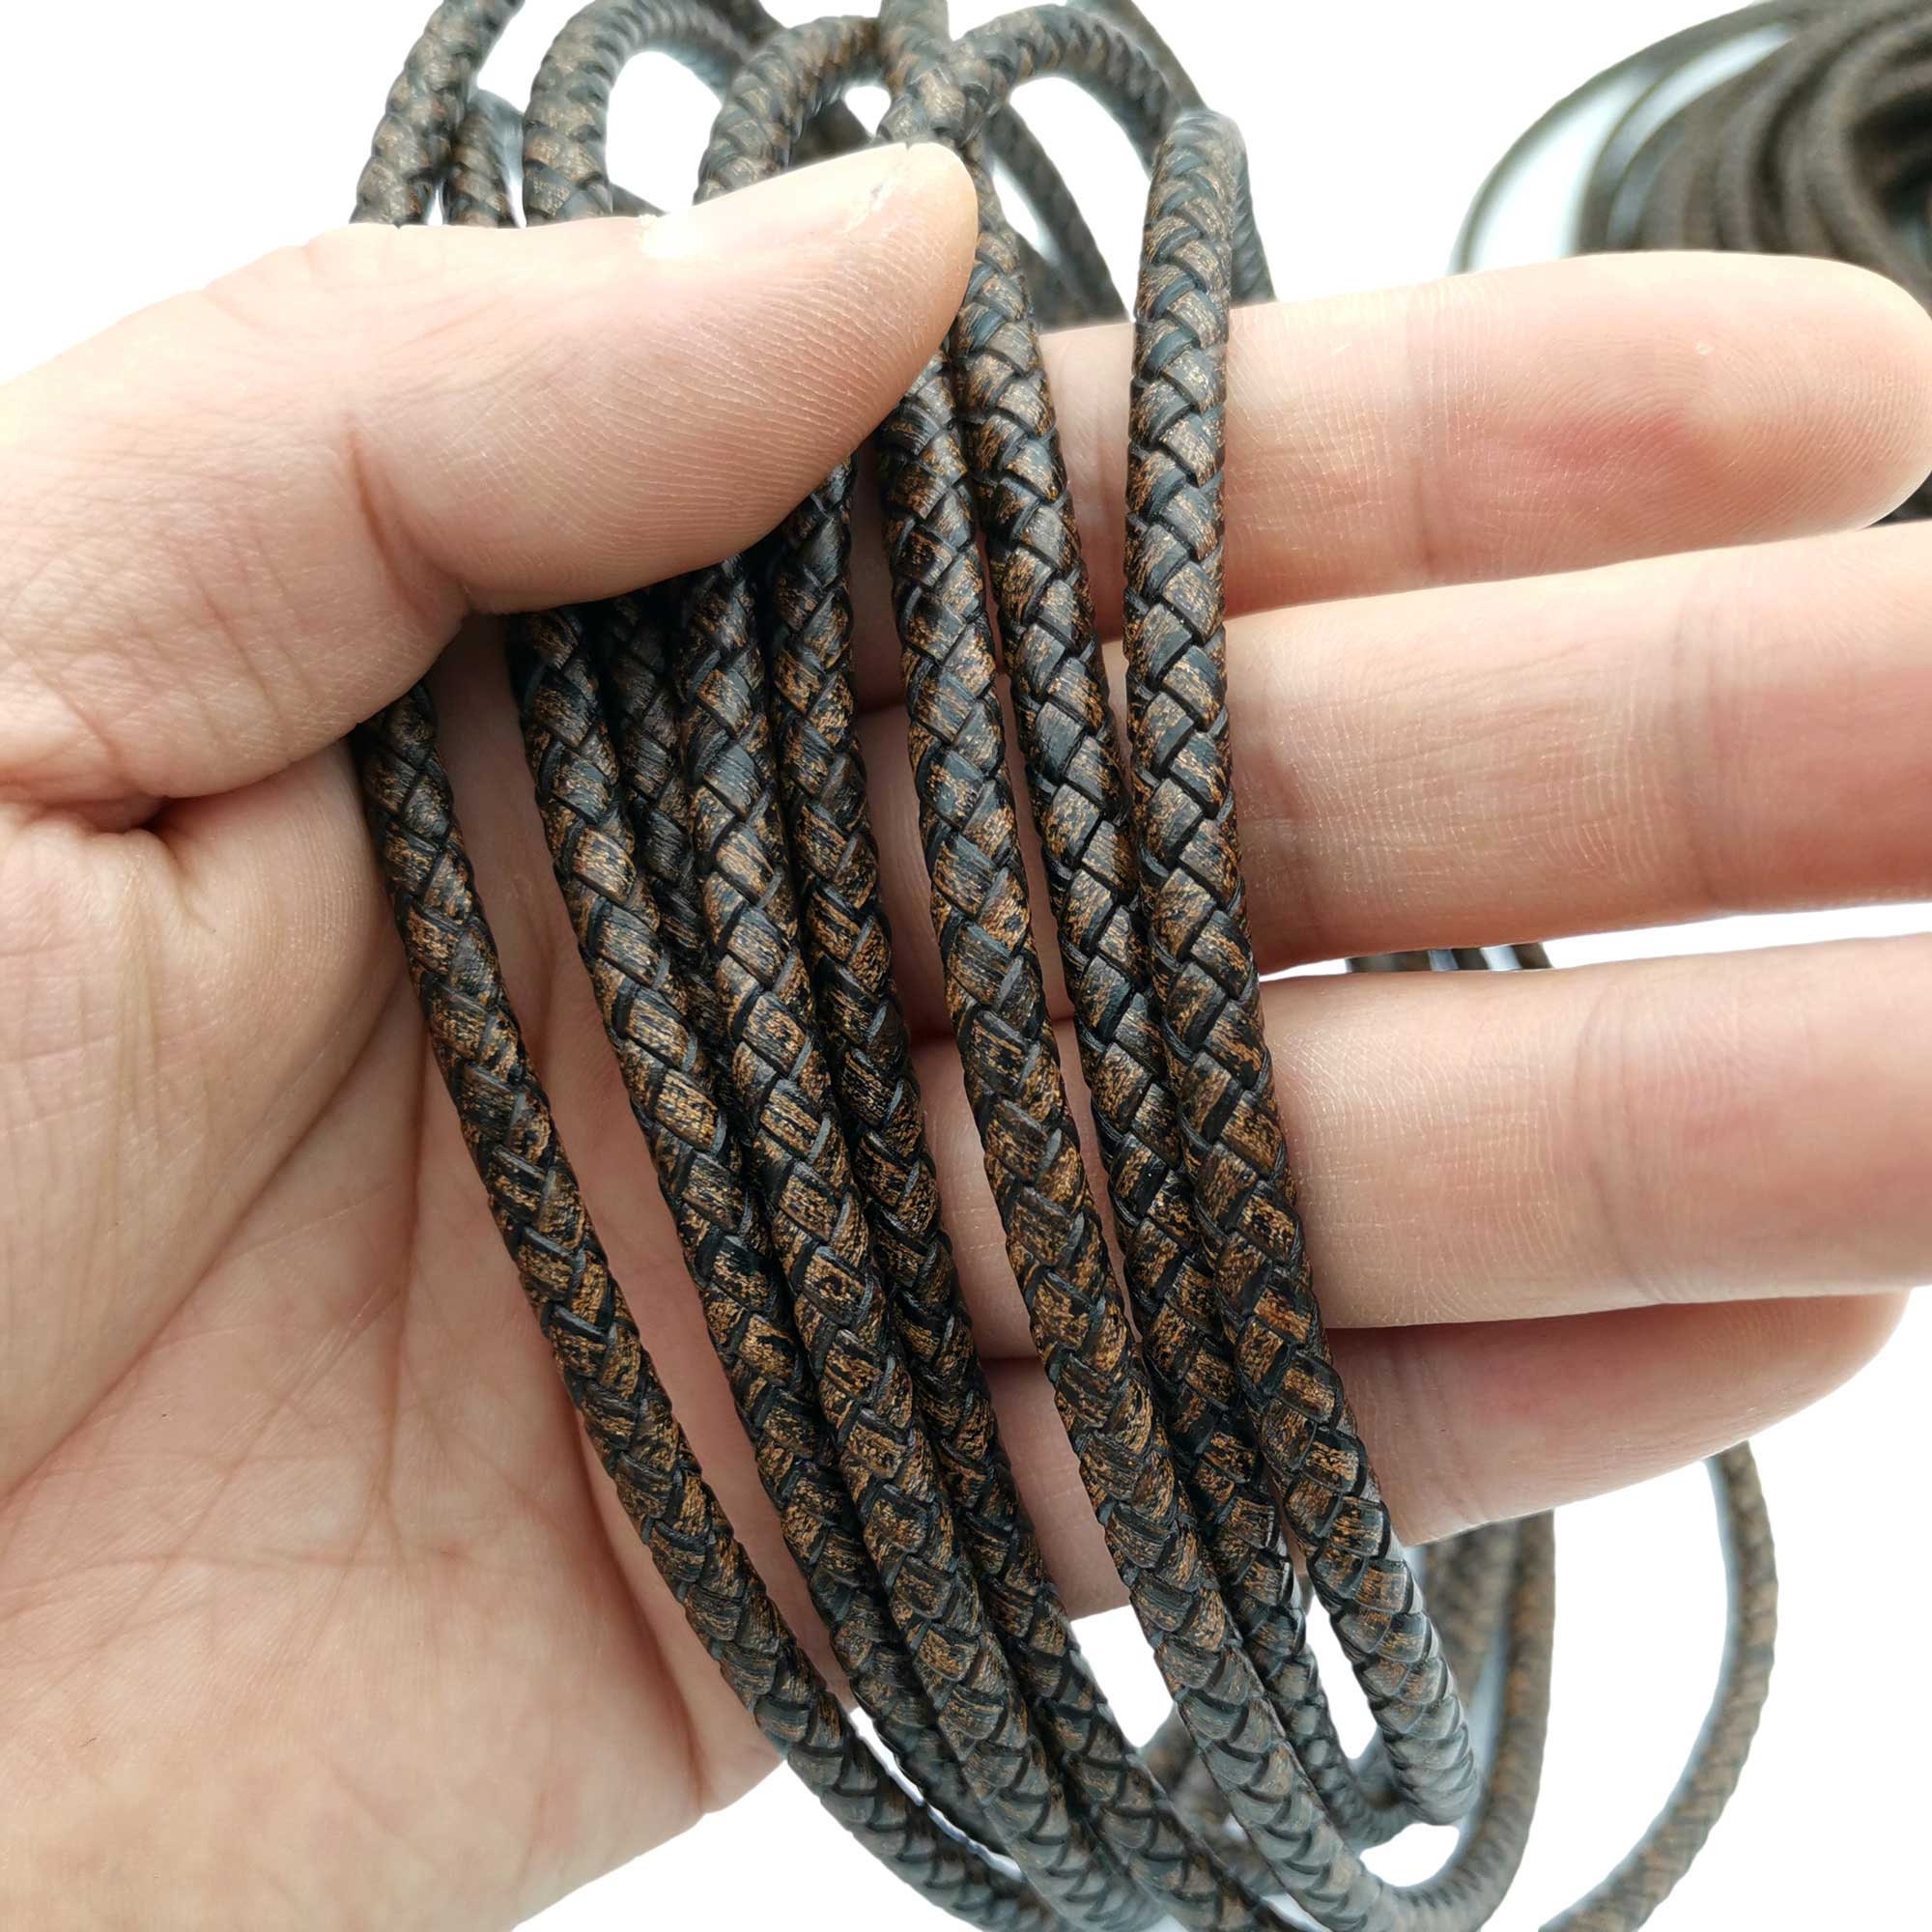 shapesbyX 5 Yards 4mm Braided Leather Strap Round Leather